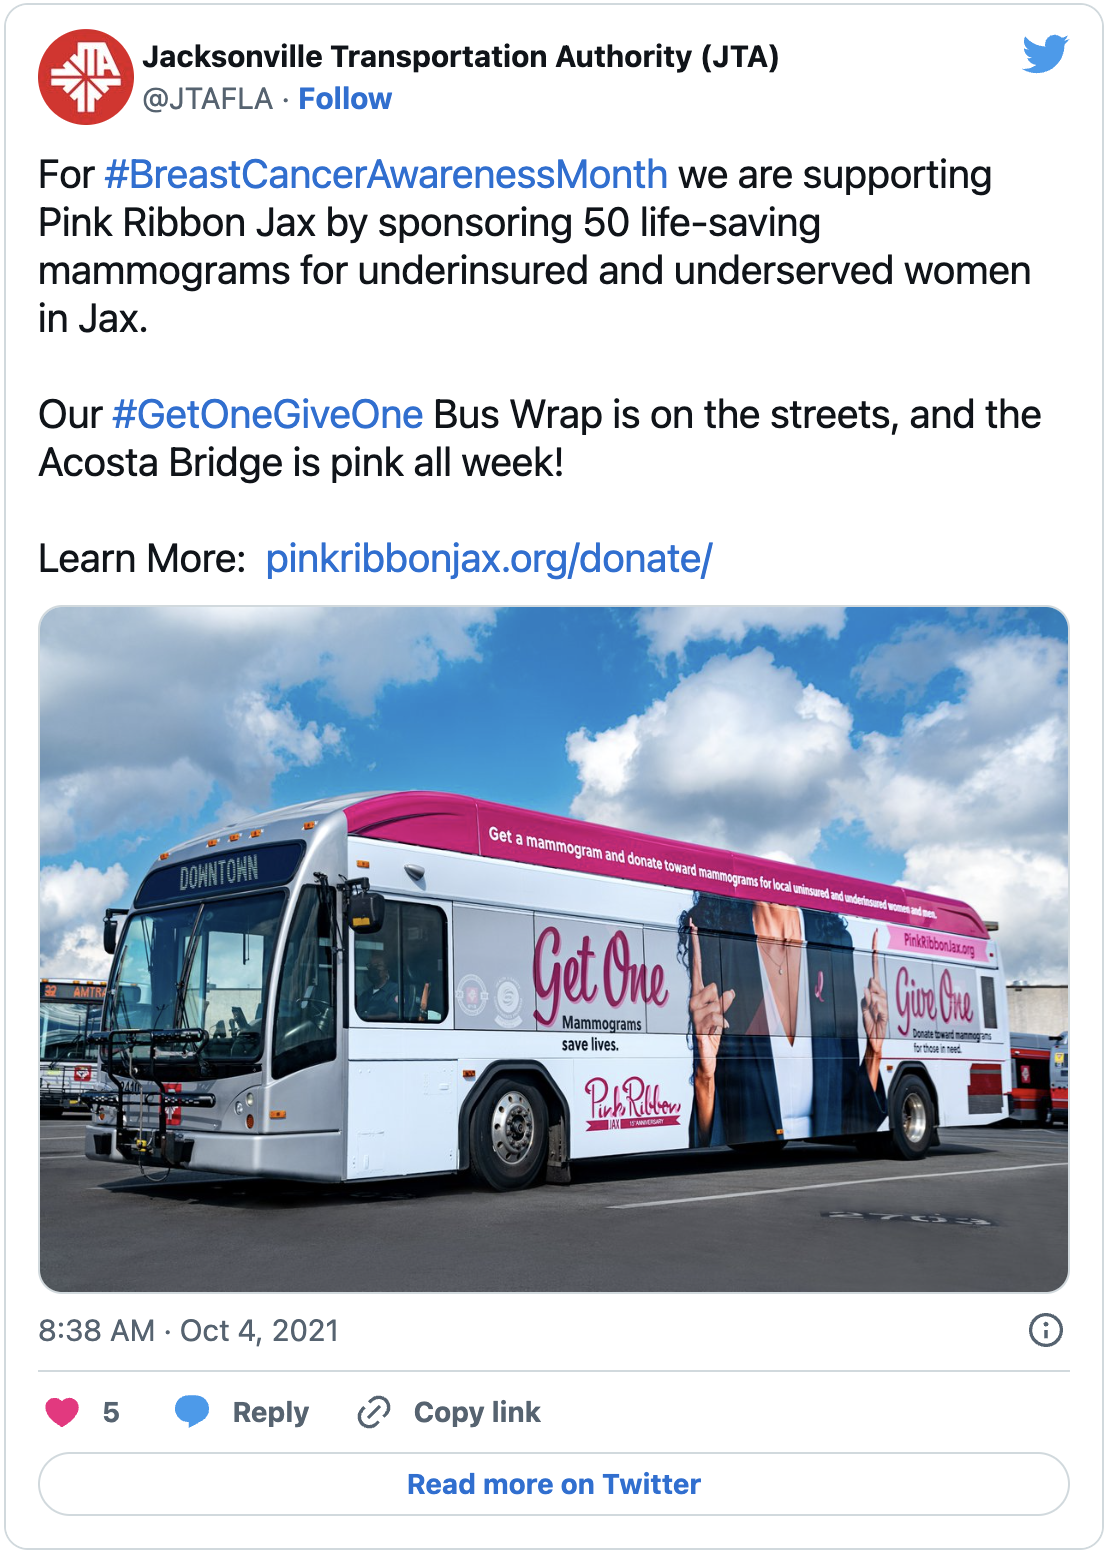 A tweet about JTA's partnership with Pink Ribbon Jax that reads For  Breast Cancer Awareness Month we are supporting Pink Ribbon Jax by sponsoring 50 life-saving mammograms for underinsured and underserved women in Jax. Our Get One Give One Bus Wrap is on the streets, and the Acosta Bridge is pink all week! Learn More at https://pinkribbonjax.org/donate/